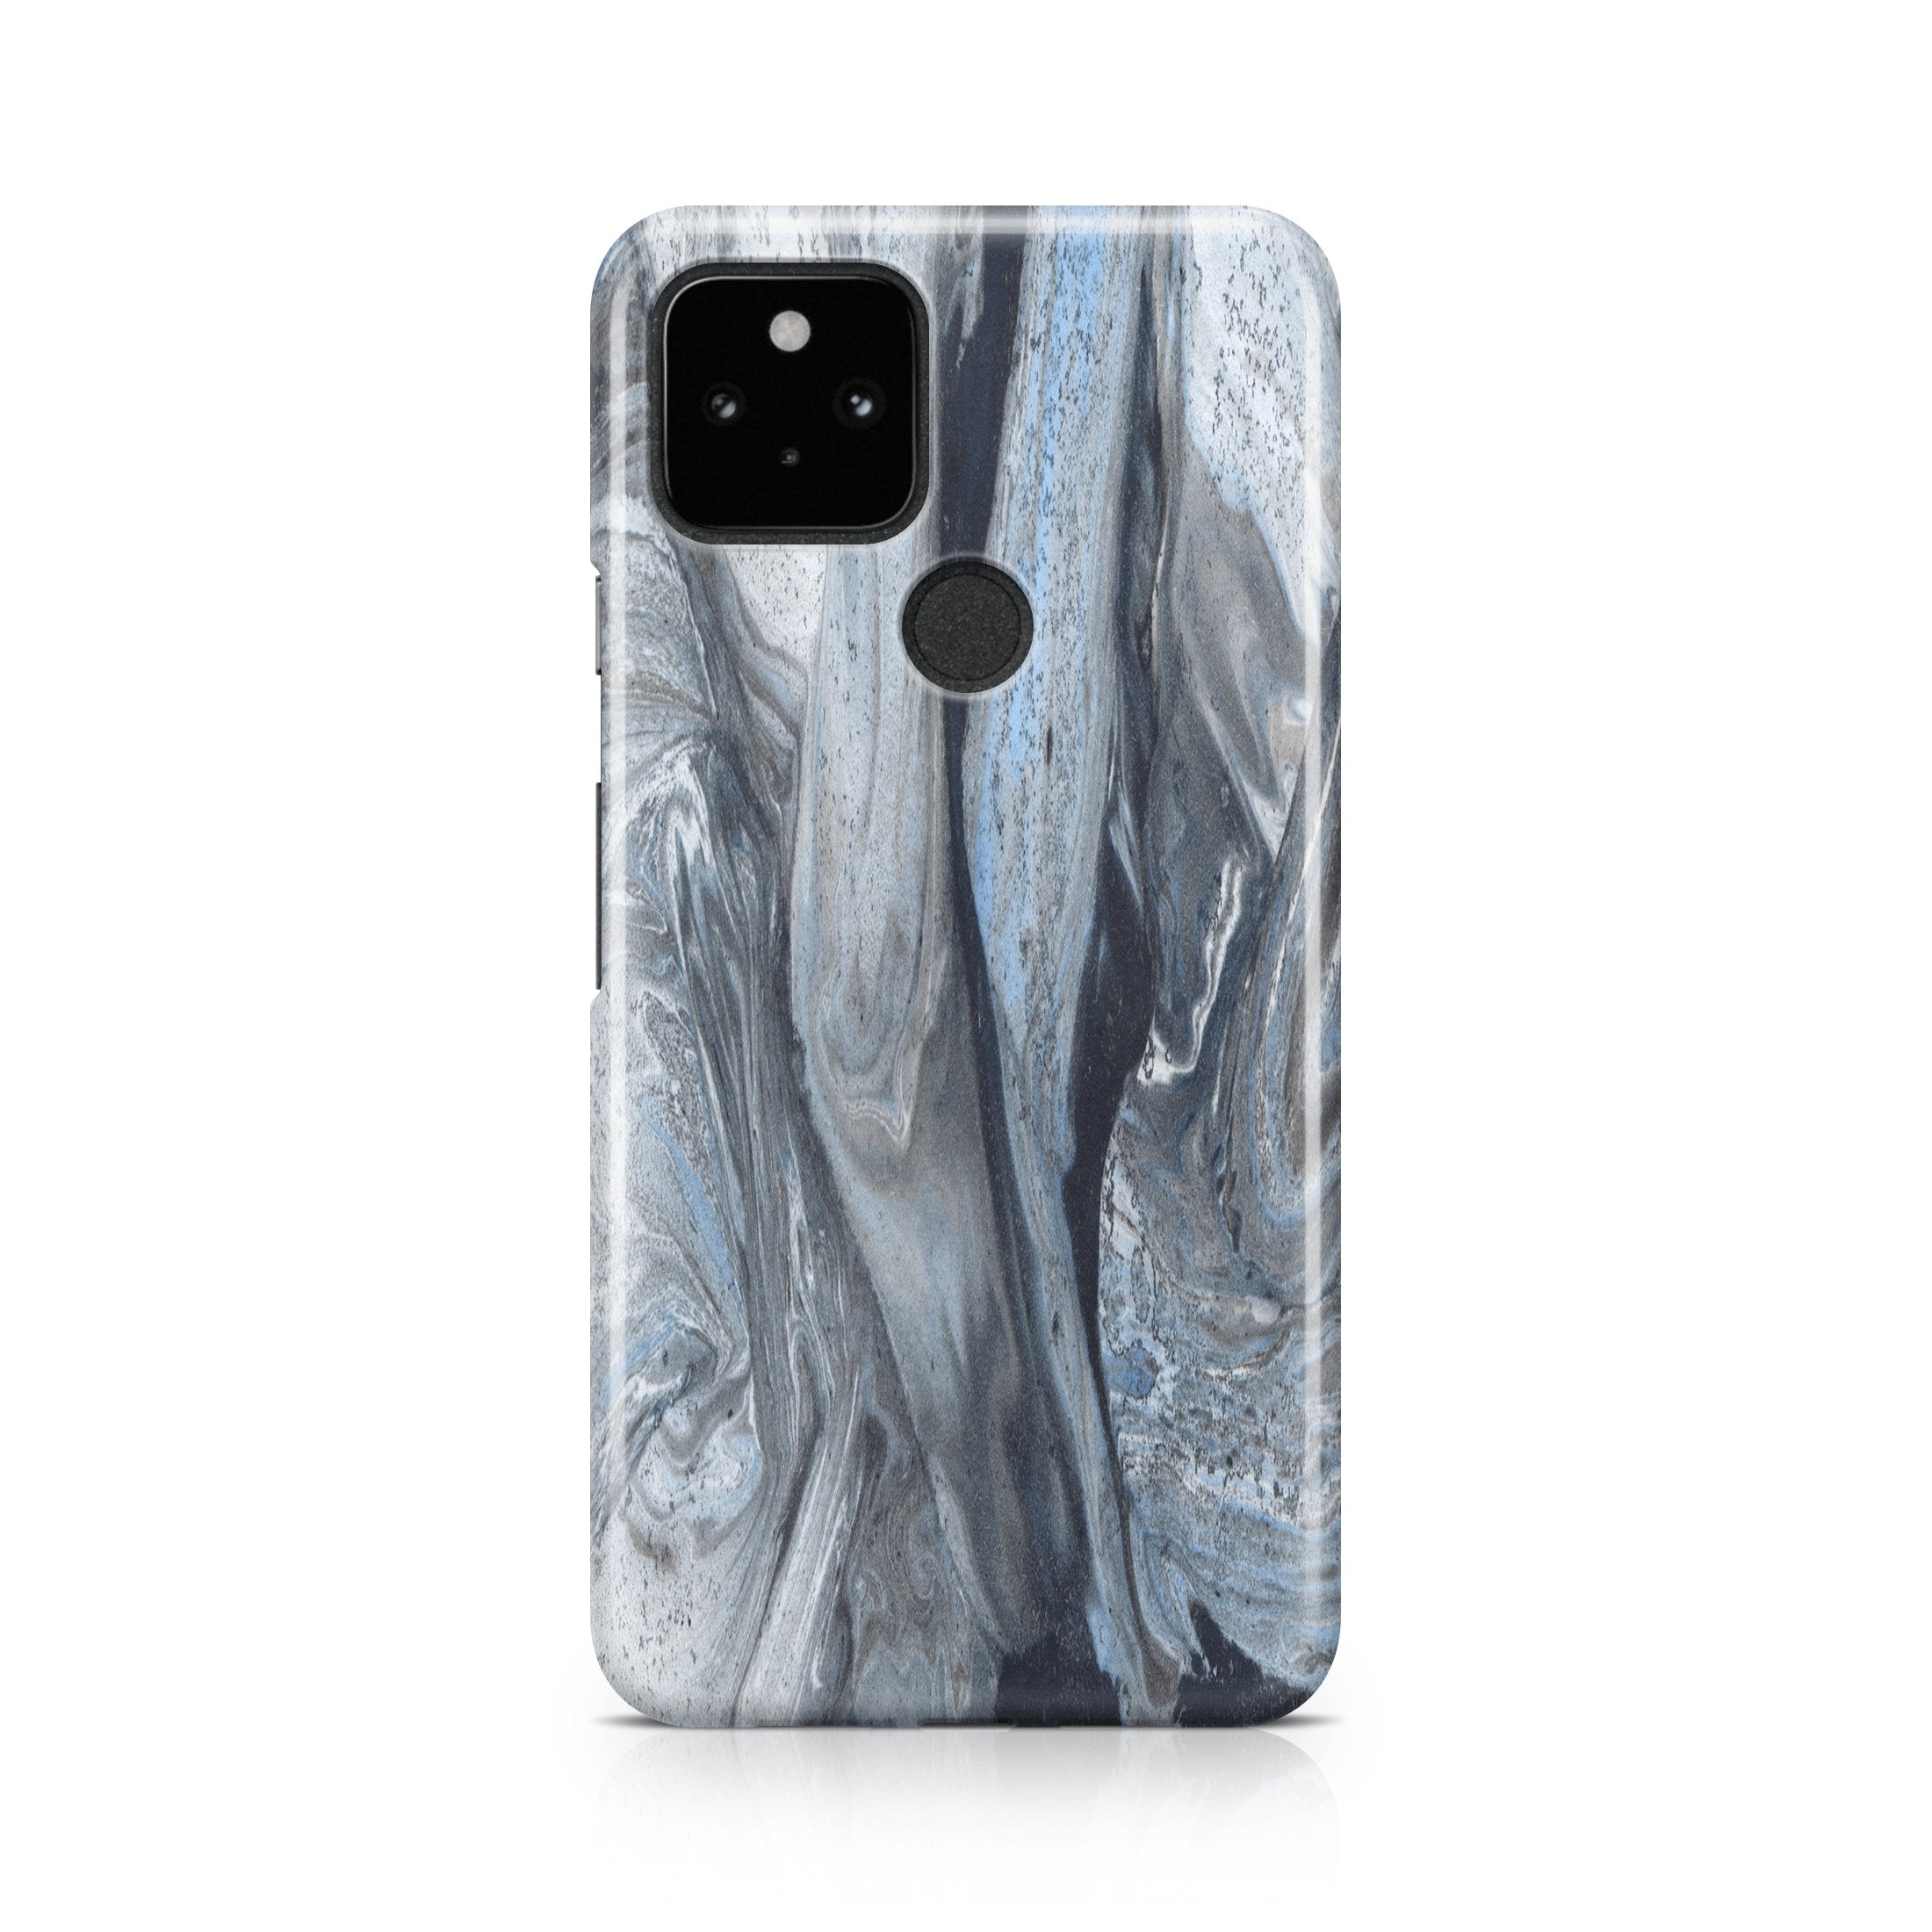 Black & White Marble Series II - Google phone case designs by CaseSwagger